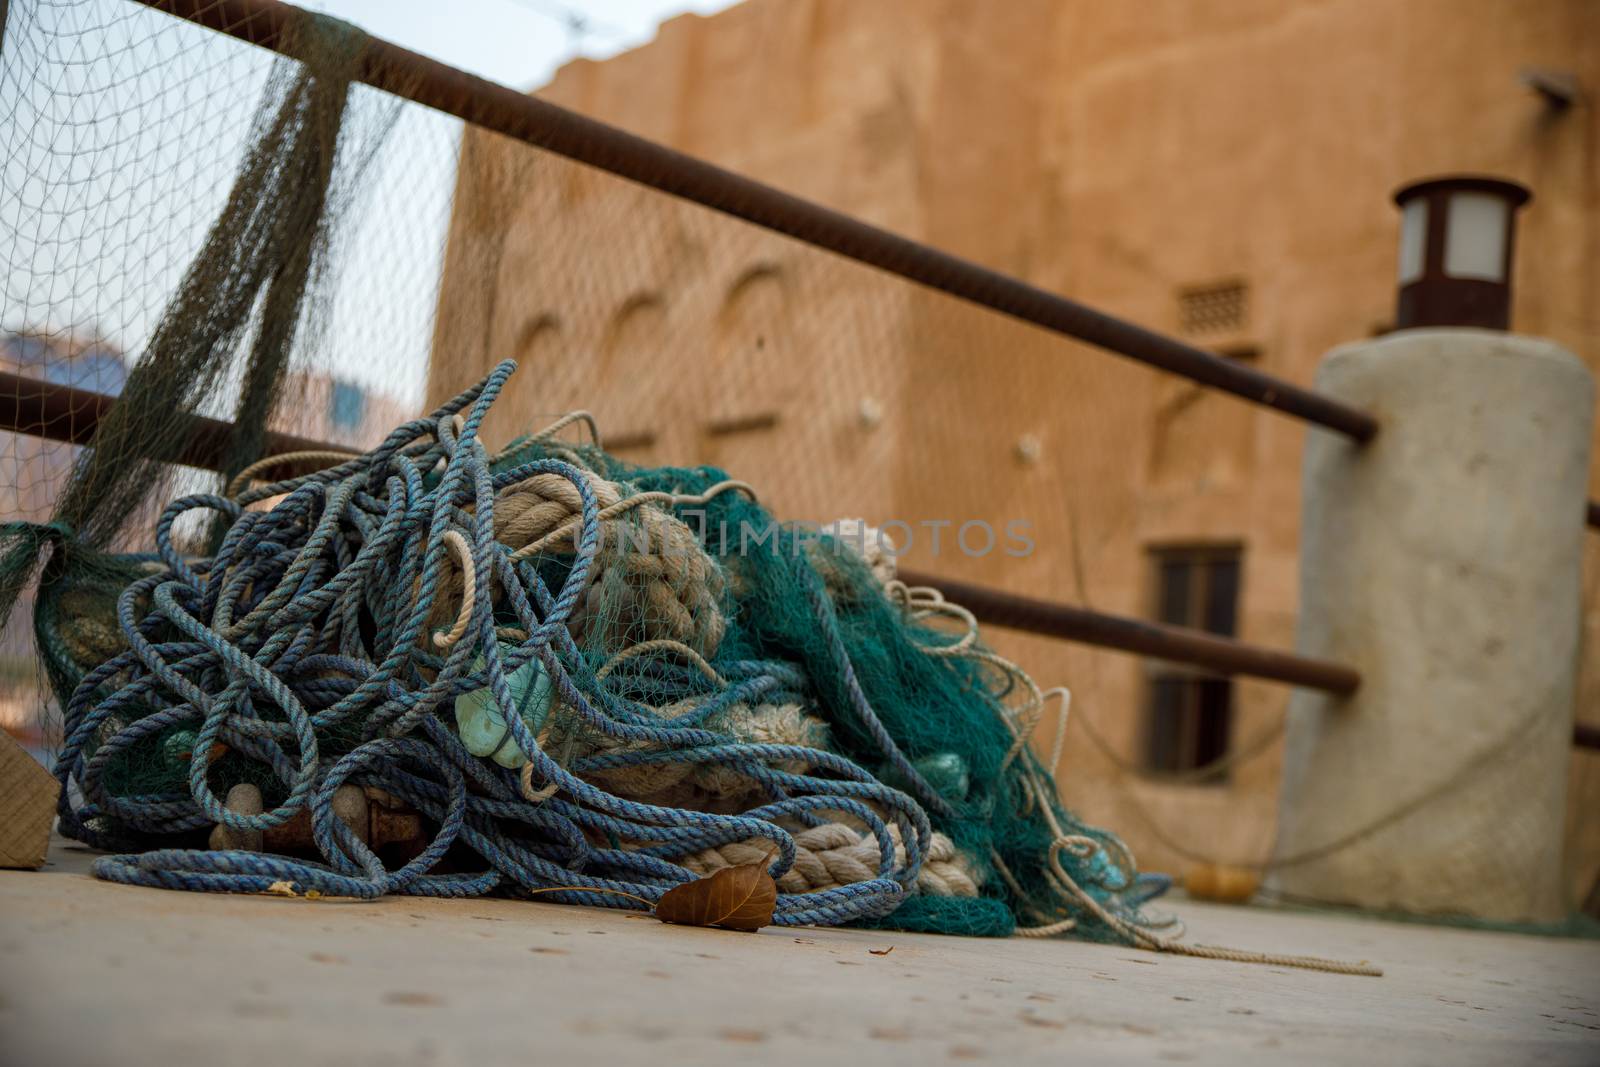 Fishing nets, buoys and floats on pavement not being used in old town Dubai